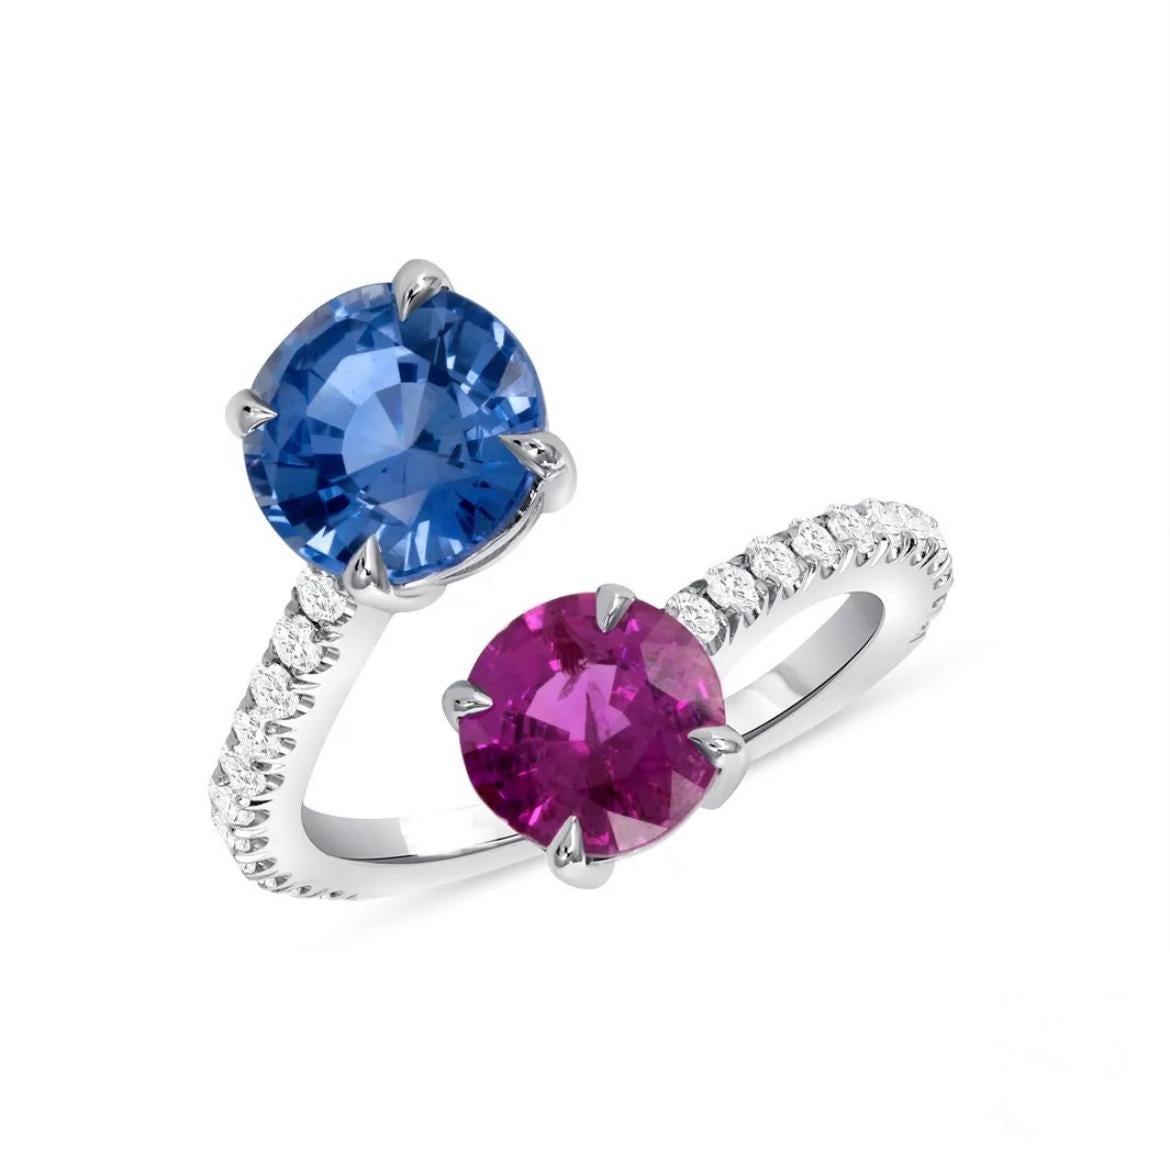 18K white gold ring, featuring a 2.40-carat Ceylon Blue Sapphire paired with a 1.60-carat Pink Sapphire, accented by round diamonds totaling 0.28ct. Round Blue Sapphire is GIA certified. 